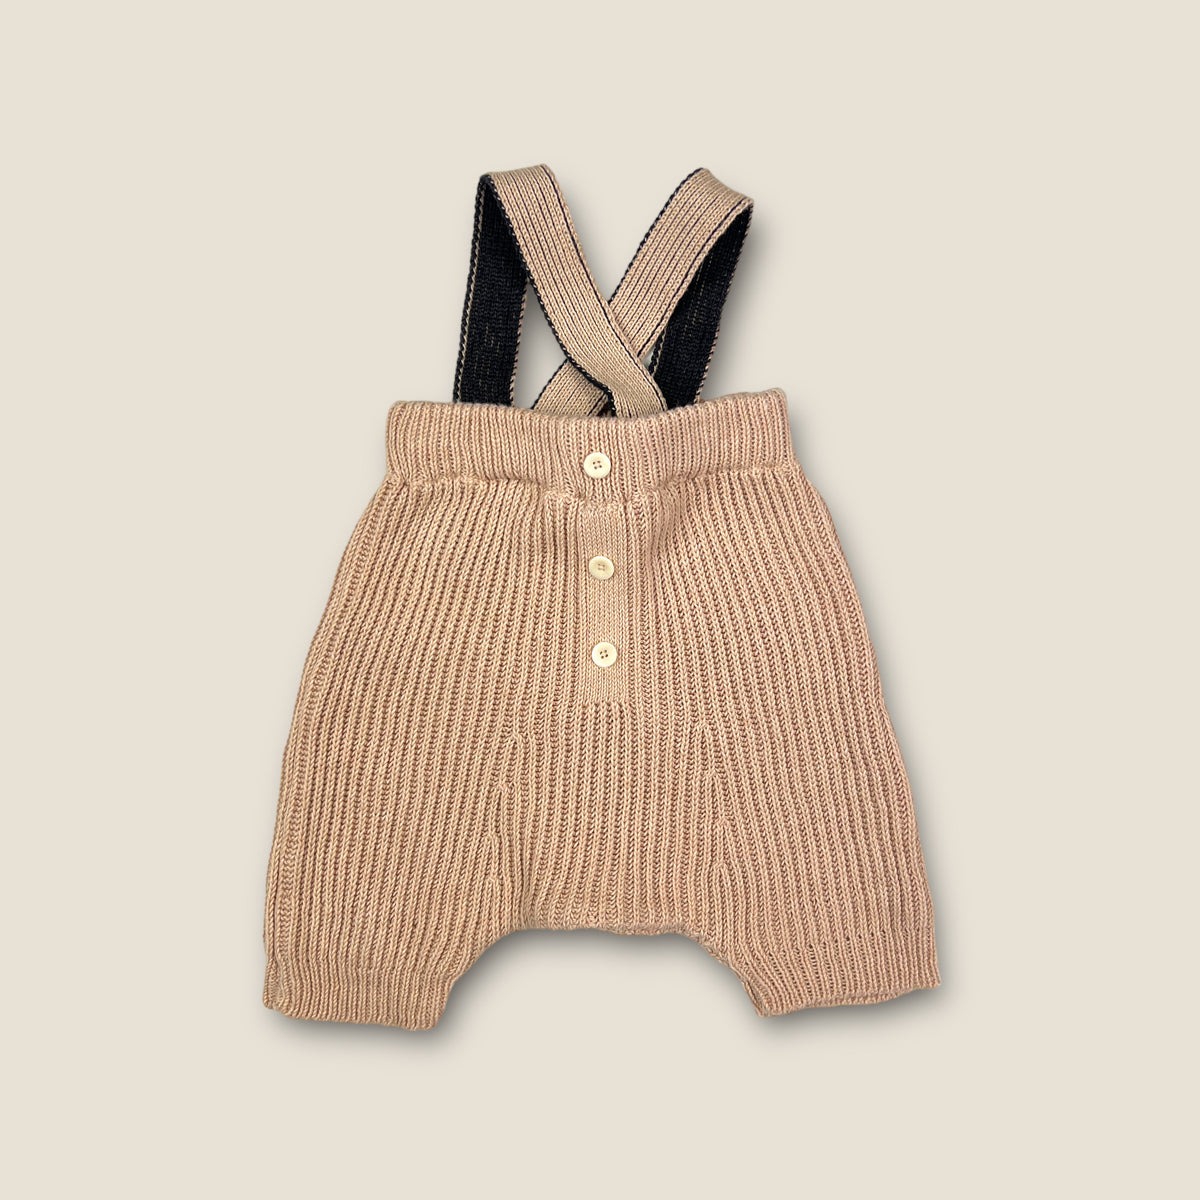 Mabli Knitted Cotton Dungarees size 6 months